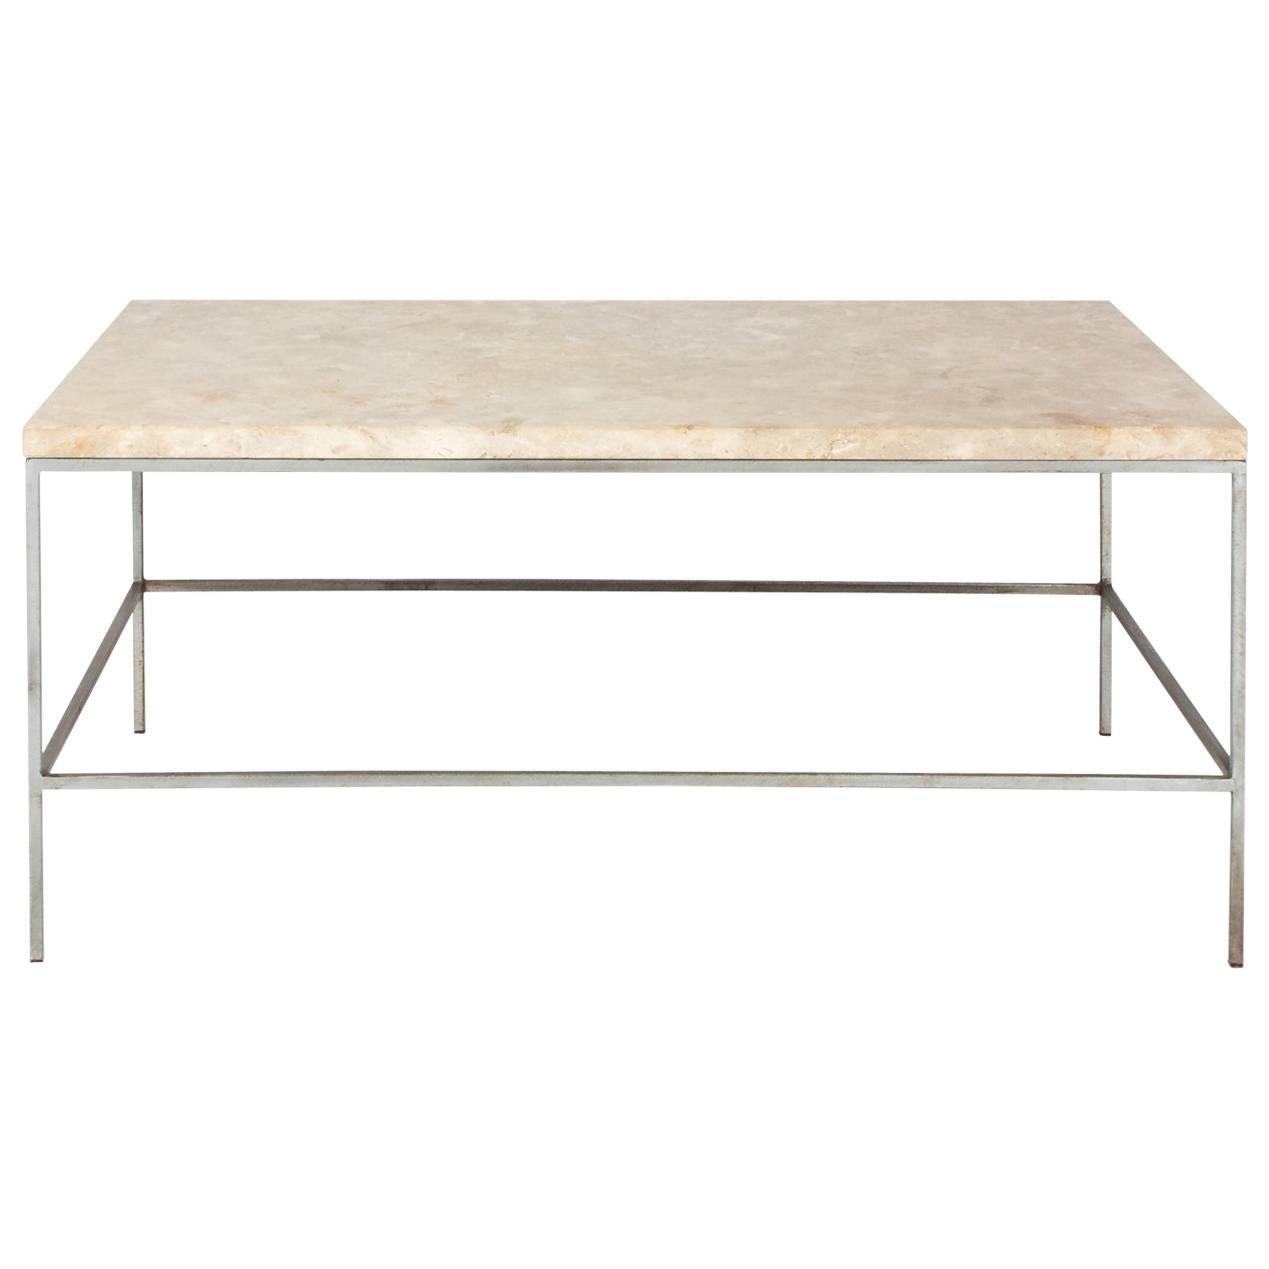 Midcentury Steel Coffee Table For Sale